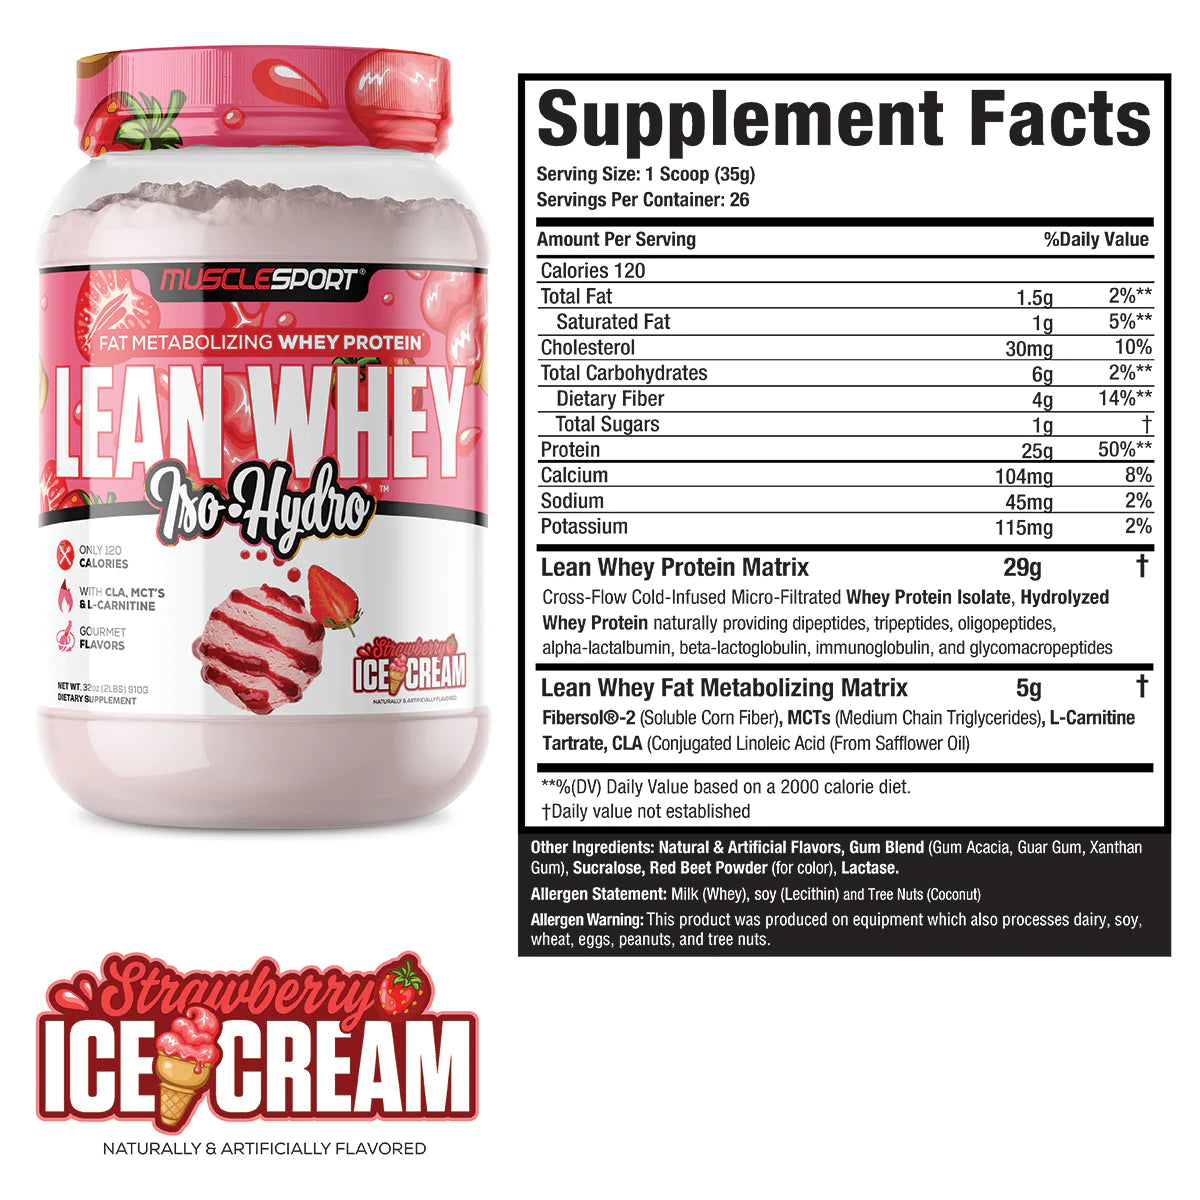 Muscle Sport Lean Whey Iso-Hydro 2lbs (Strawberry Ice Cream)